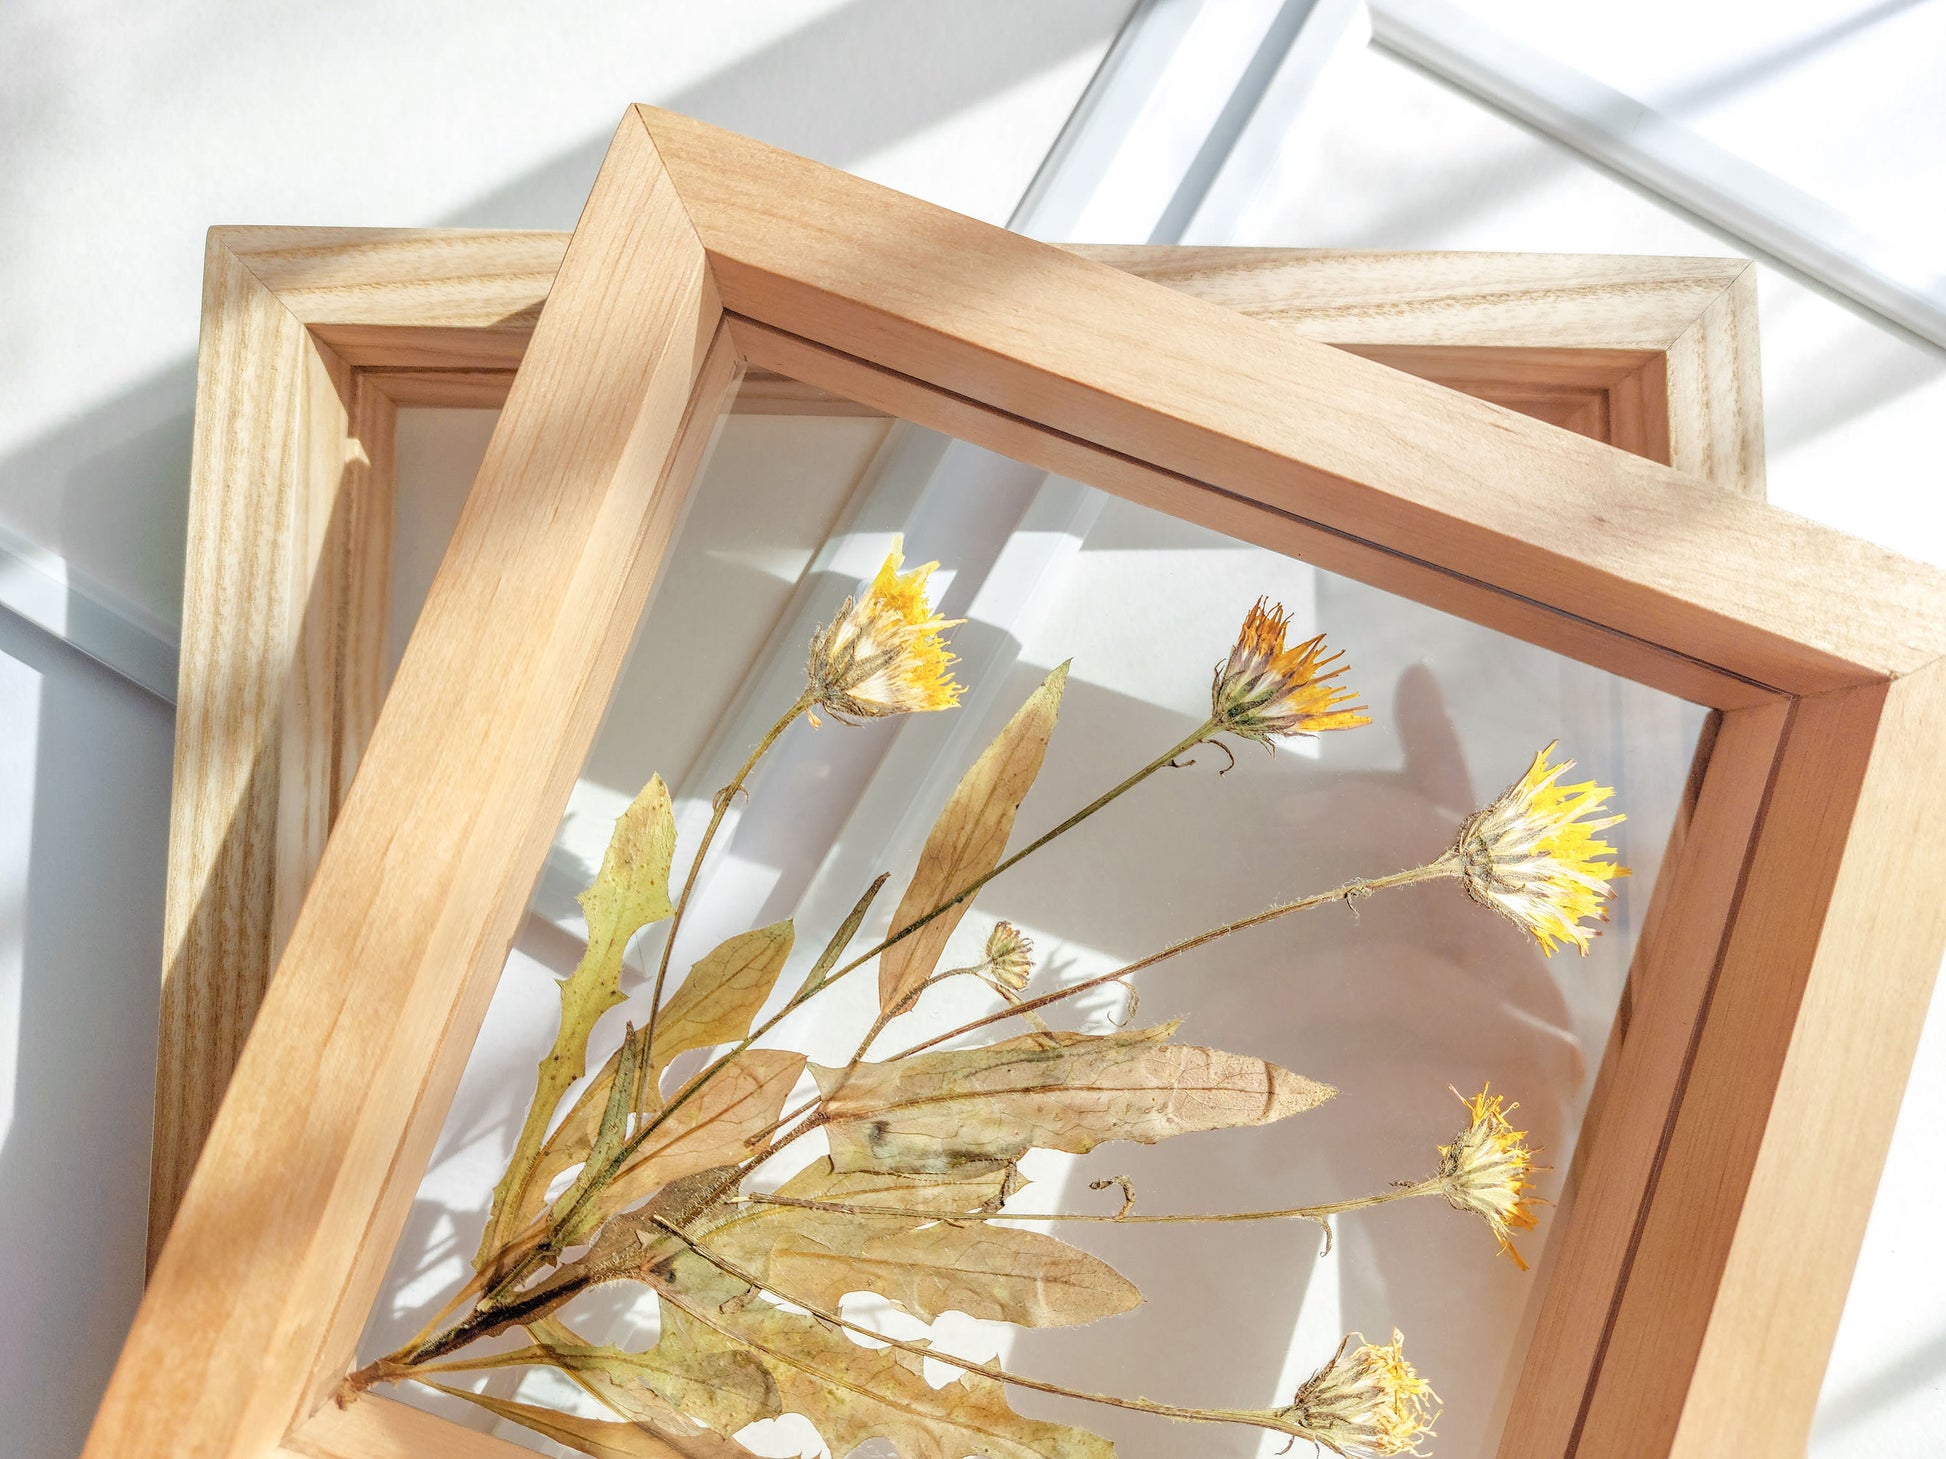 Details Real wild yellow pressed flower and plant artwork with wooden square